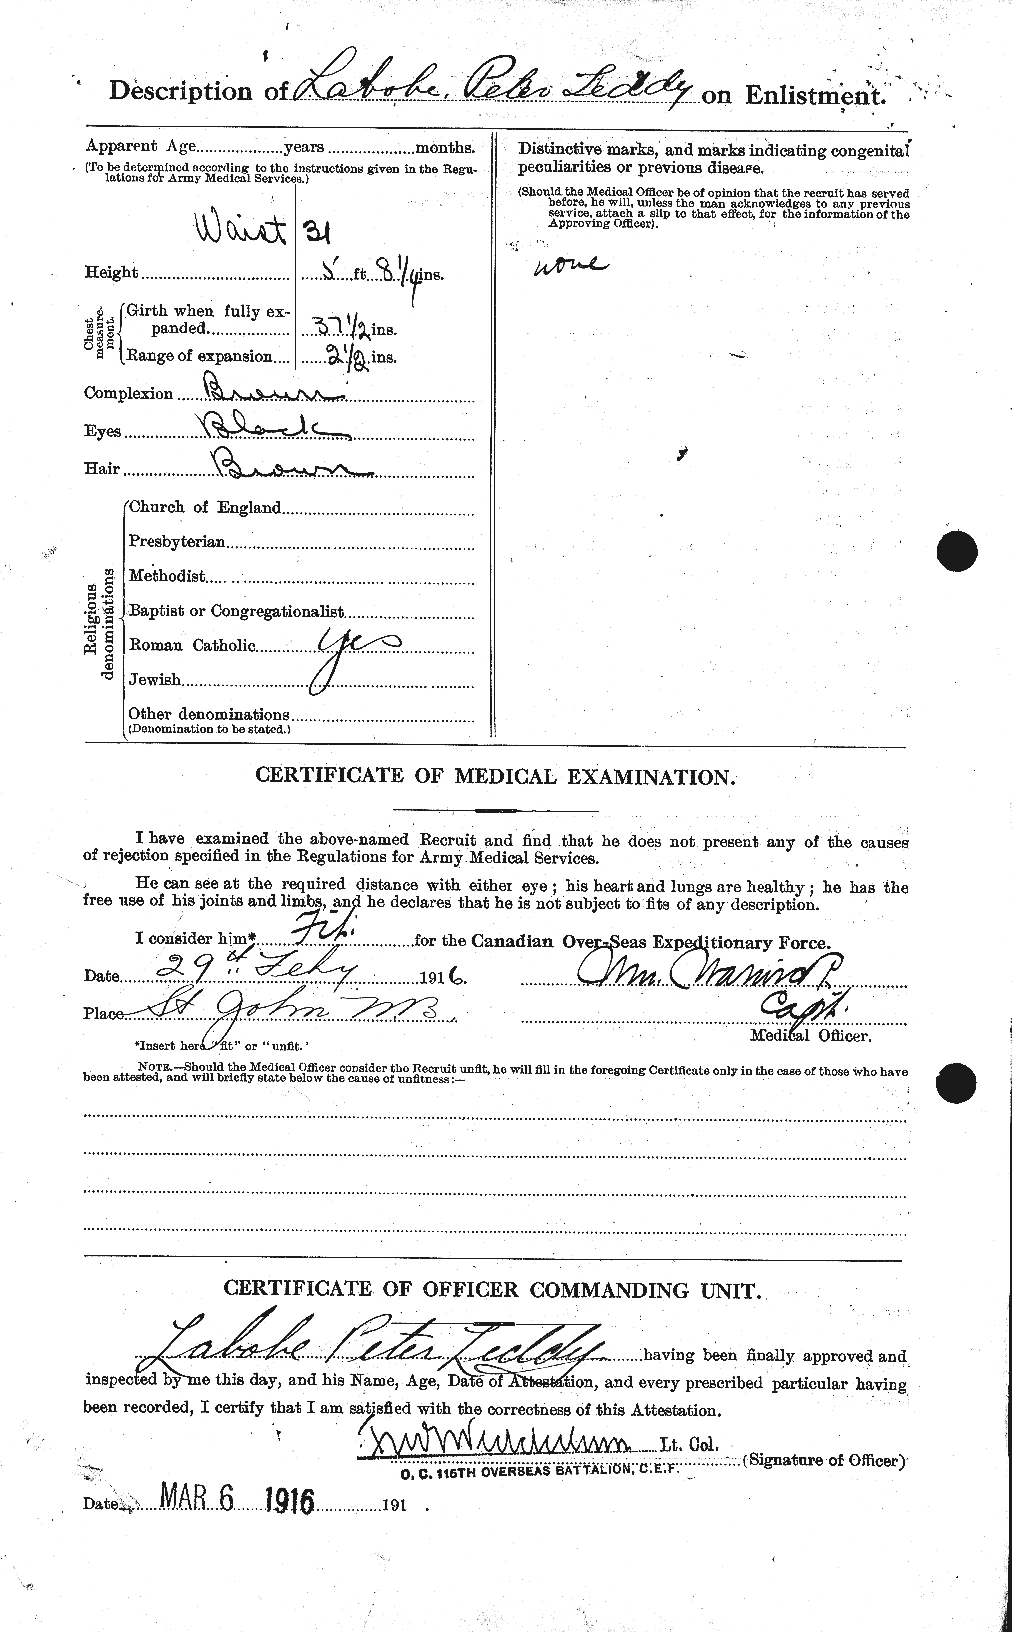 Personnel Records of the First World War - CEF 441761b